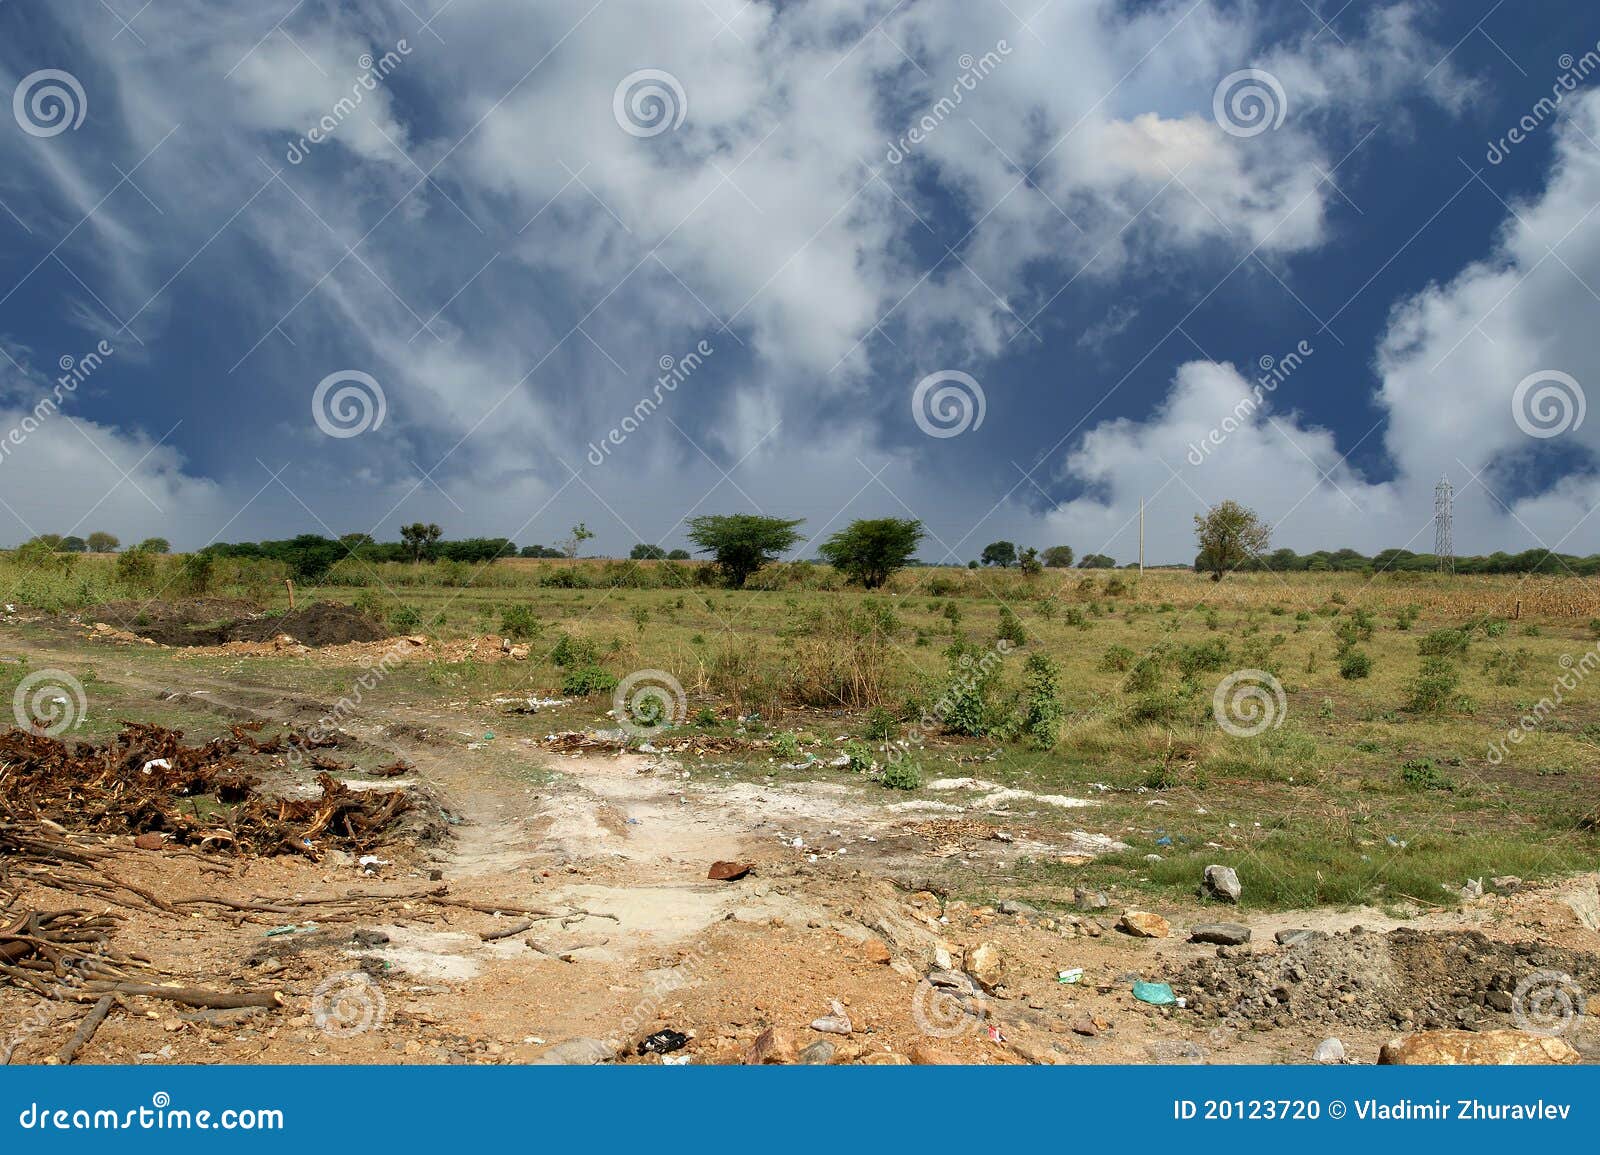 Landscape In The Summer Hot Weather. Kerala Stock Photo - Image ...